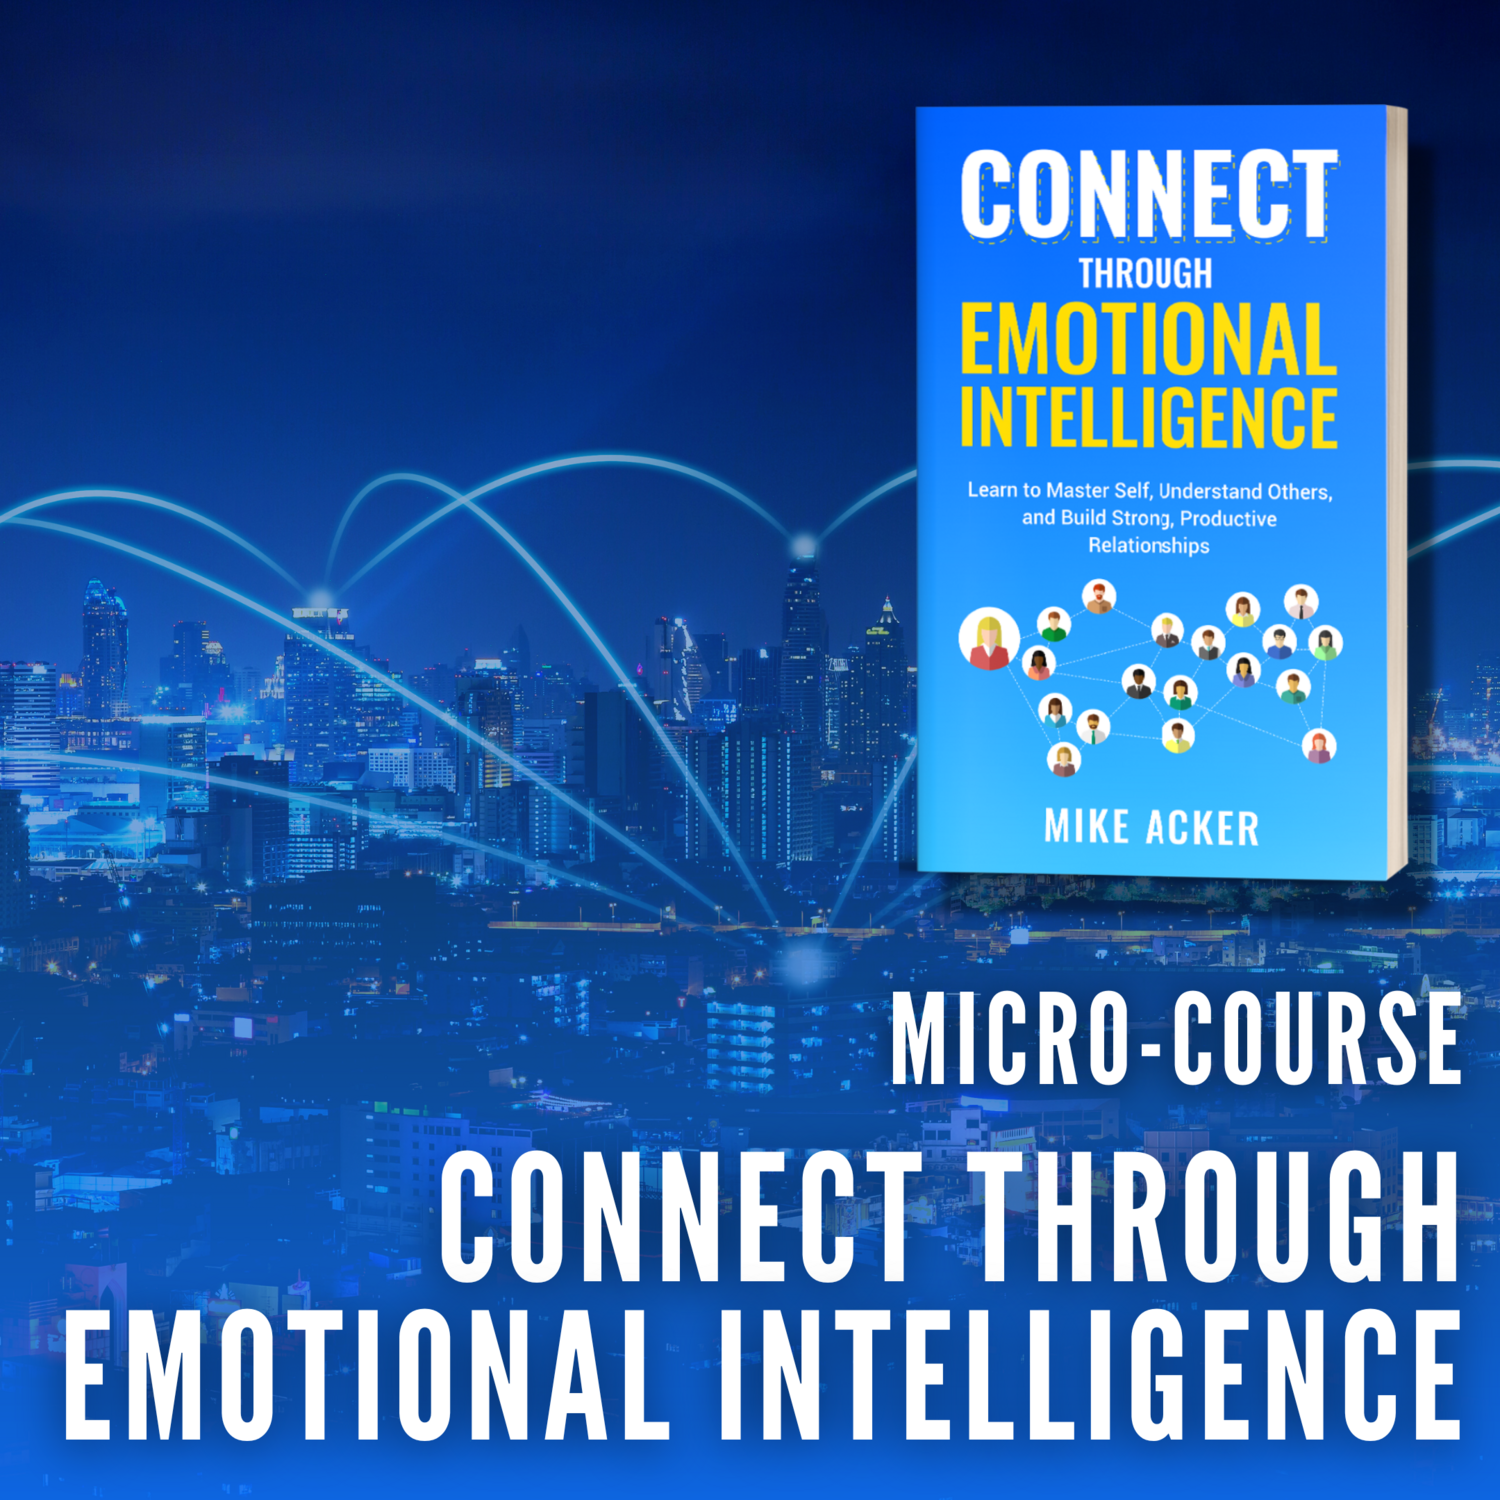 MICRO-COURSE | Connect Through Emotional Intelligence